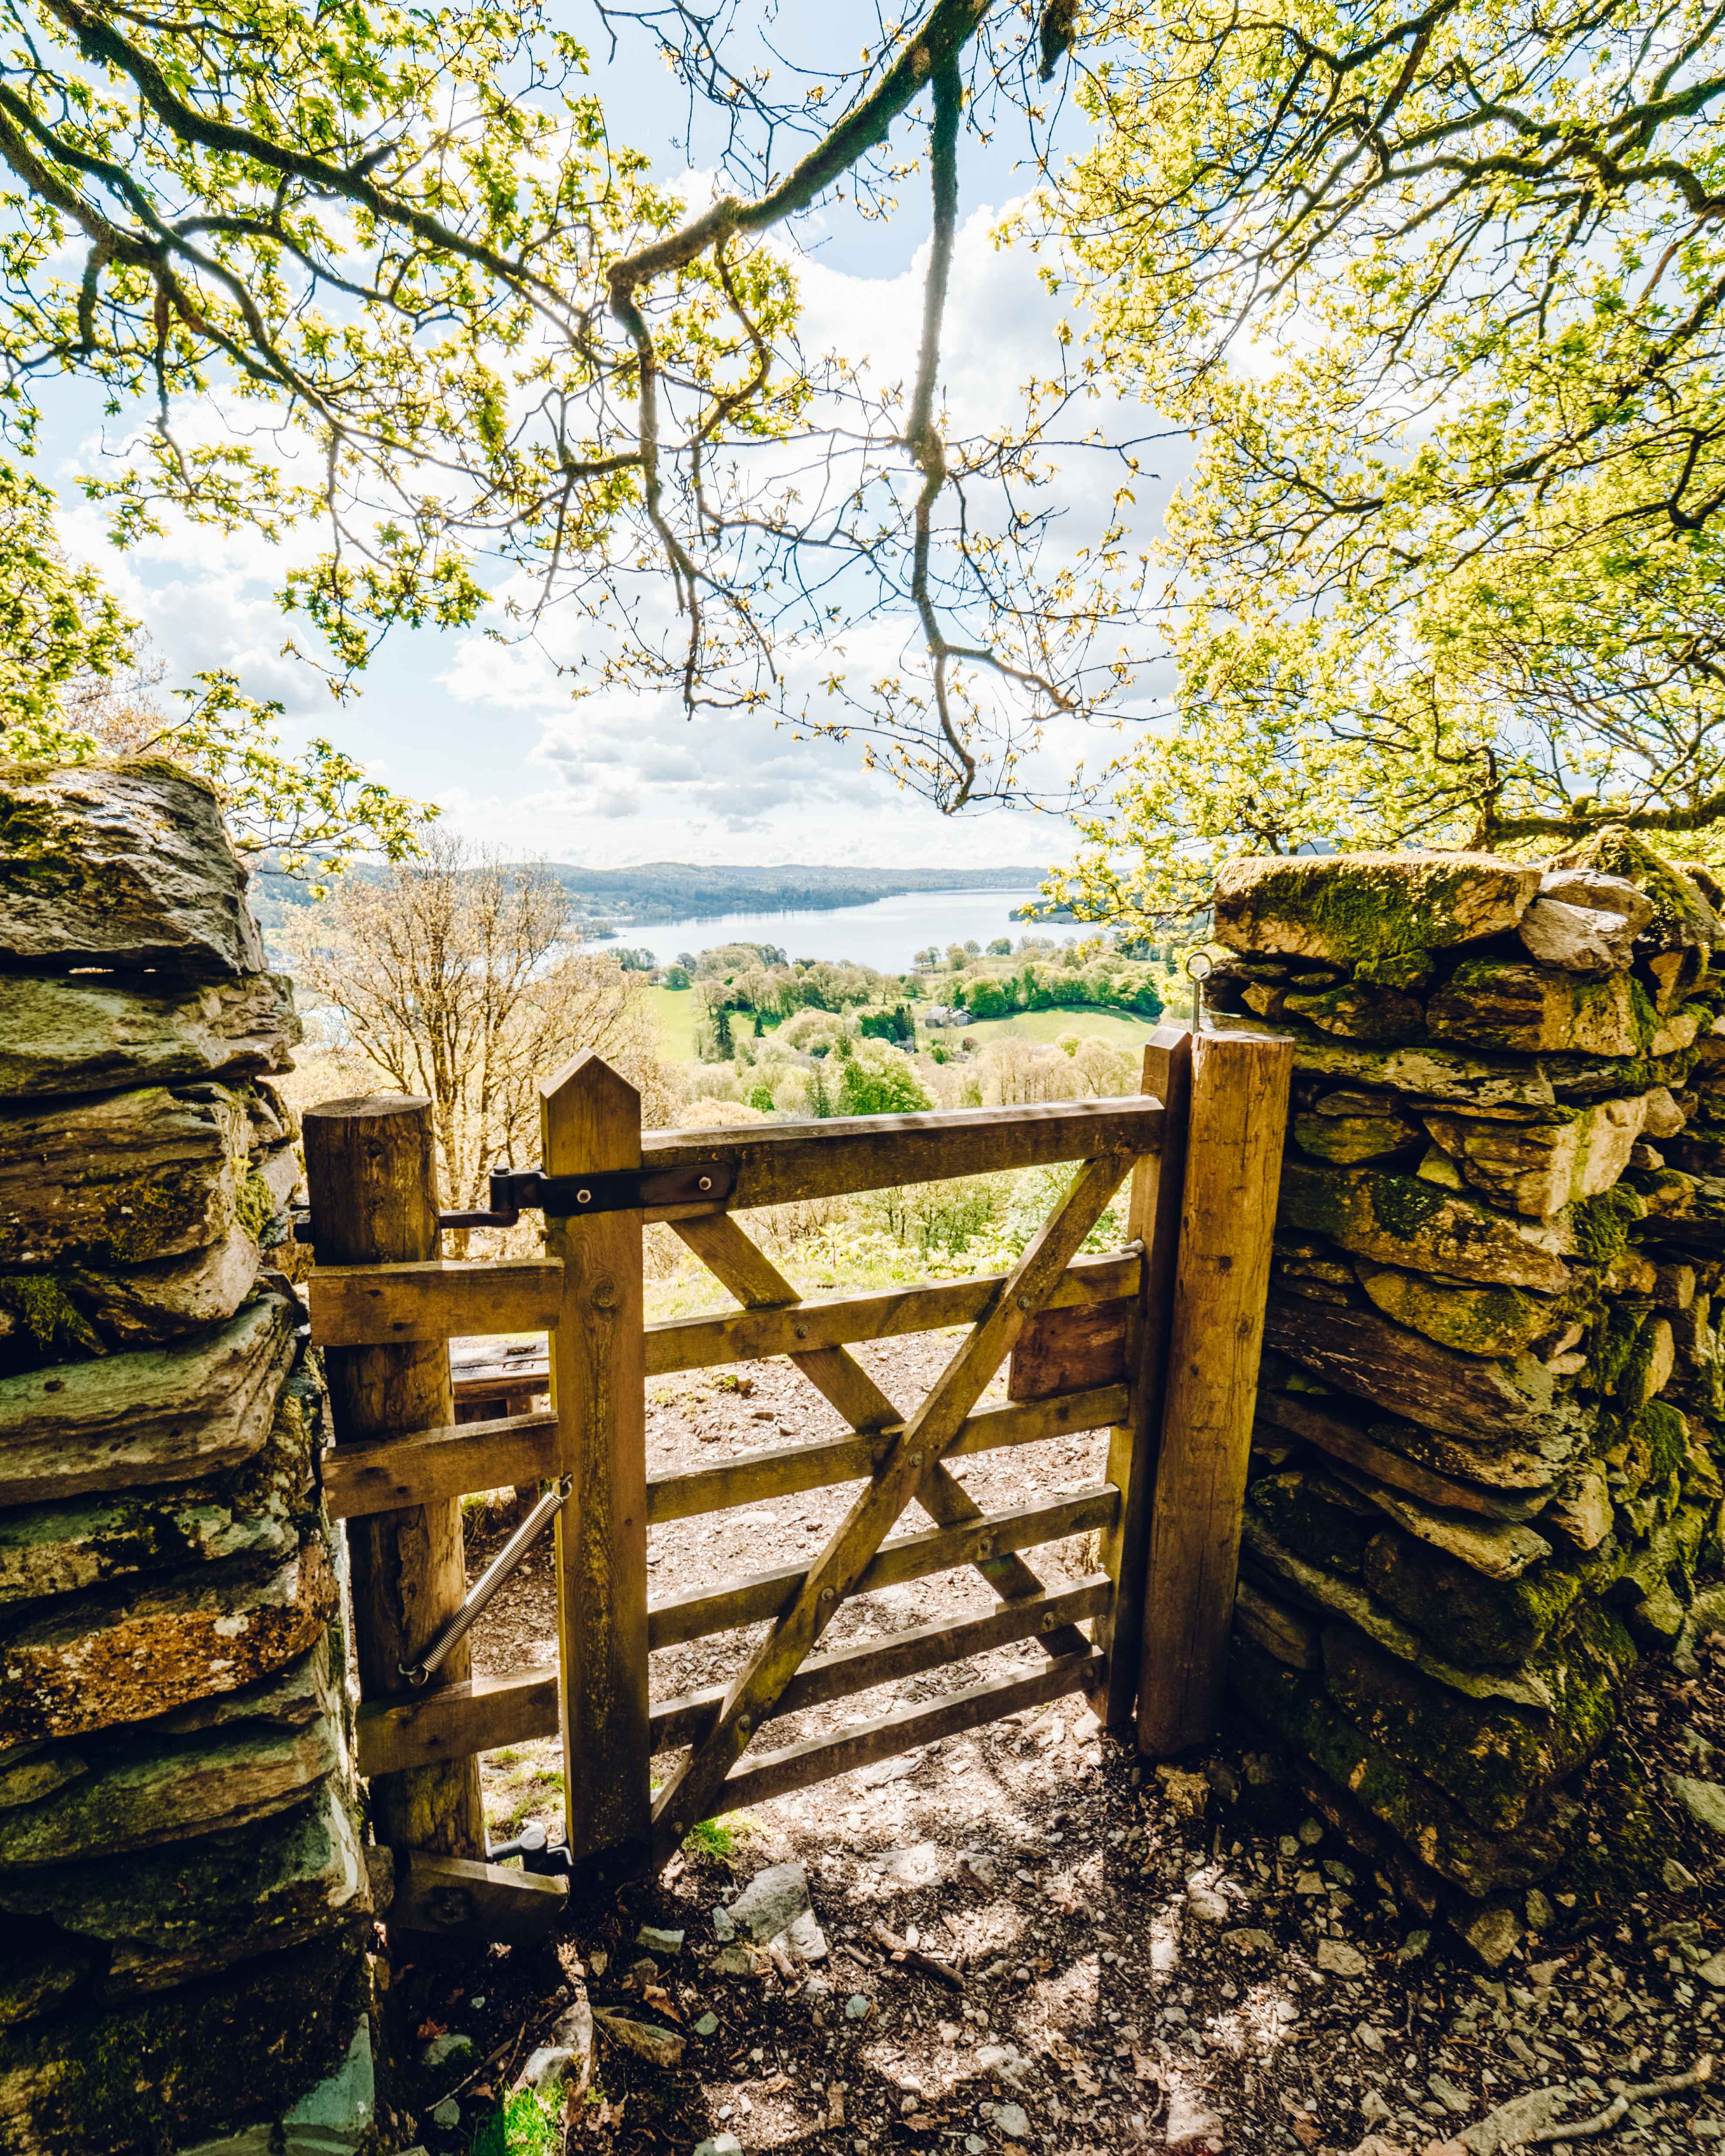 Small wooden gate on a forested path above Ambleside